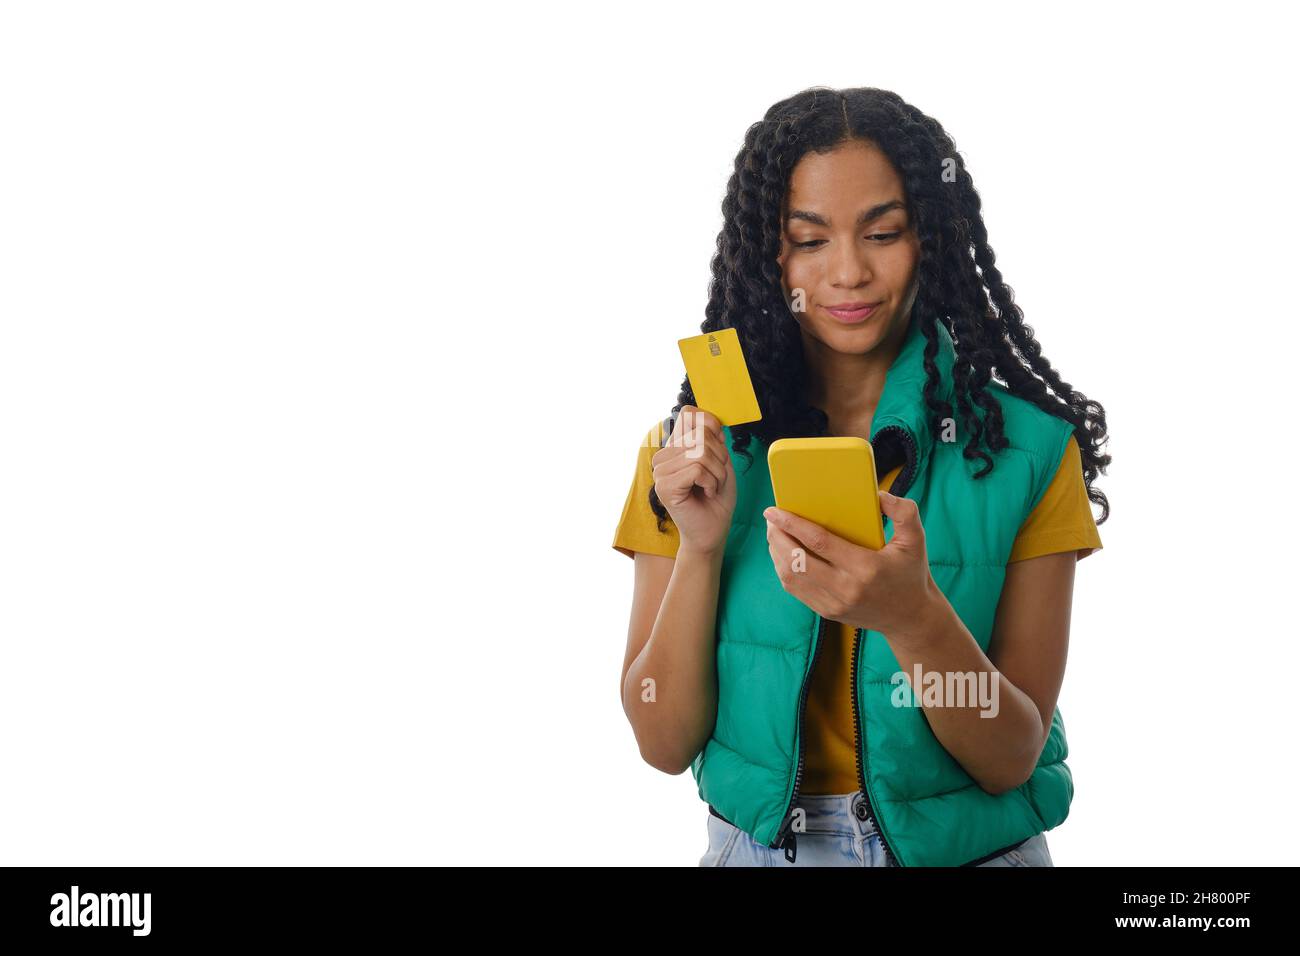 Latin woman holding a mobile phone and a credit card while standing over an isolated background. Stock Photo